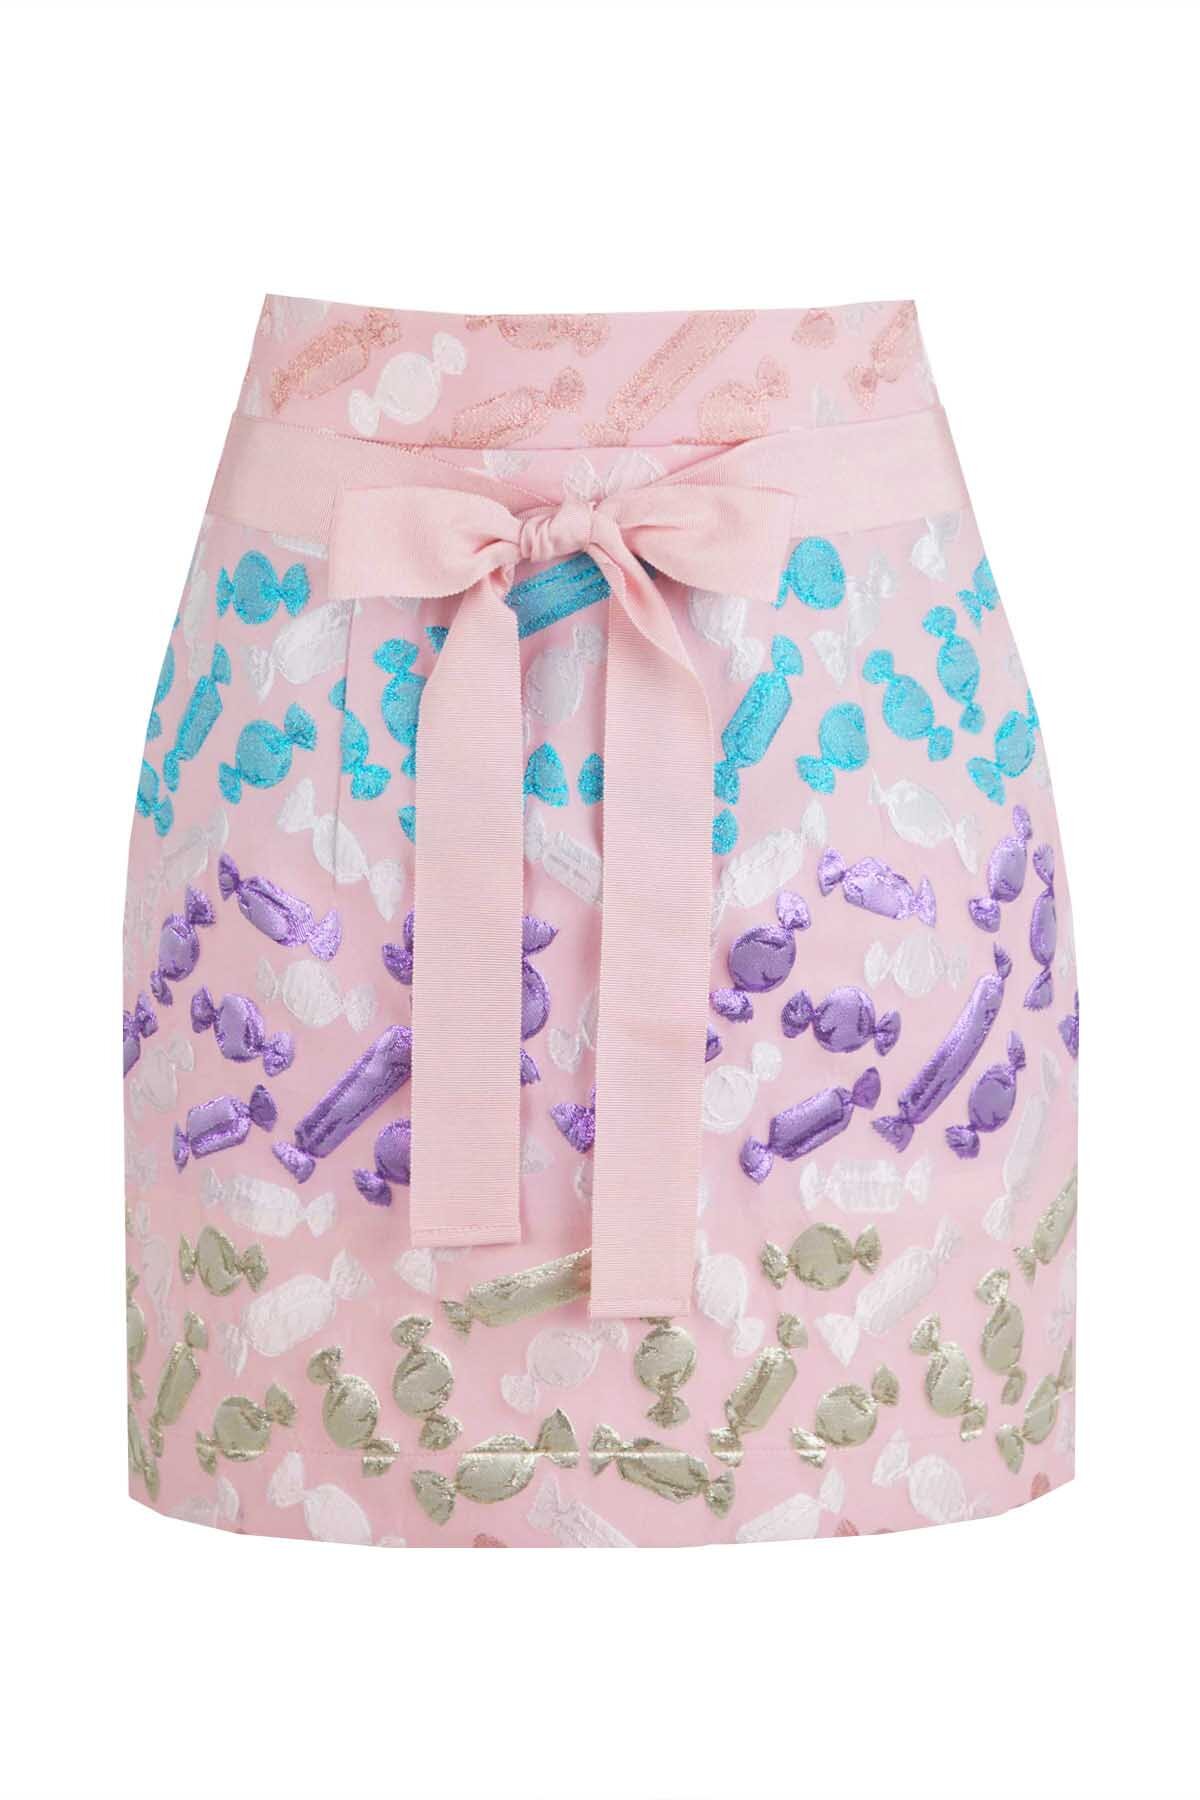 CANDY CHEEKS Skirt - The Outlet : Trelise Cooper Online - TAKE ME TO ...